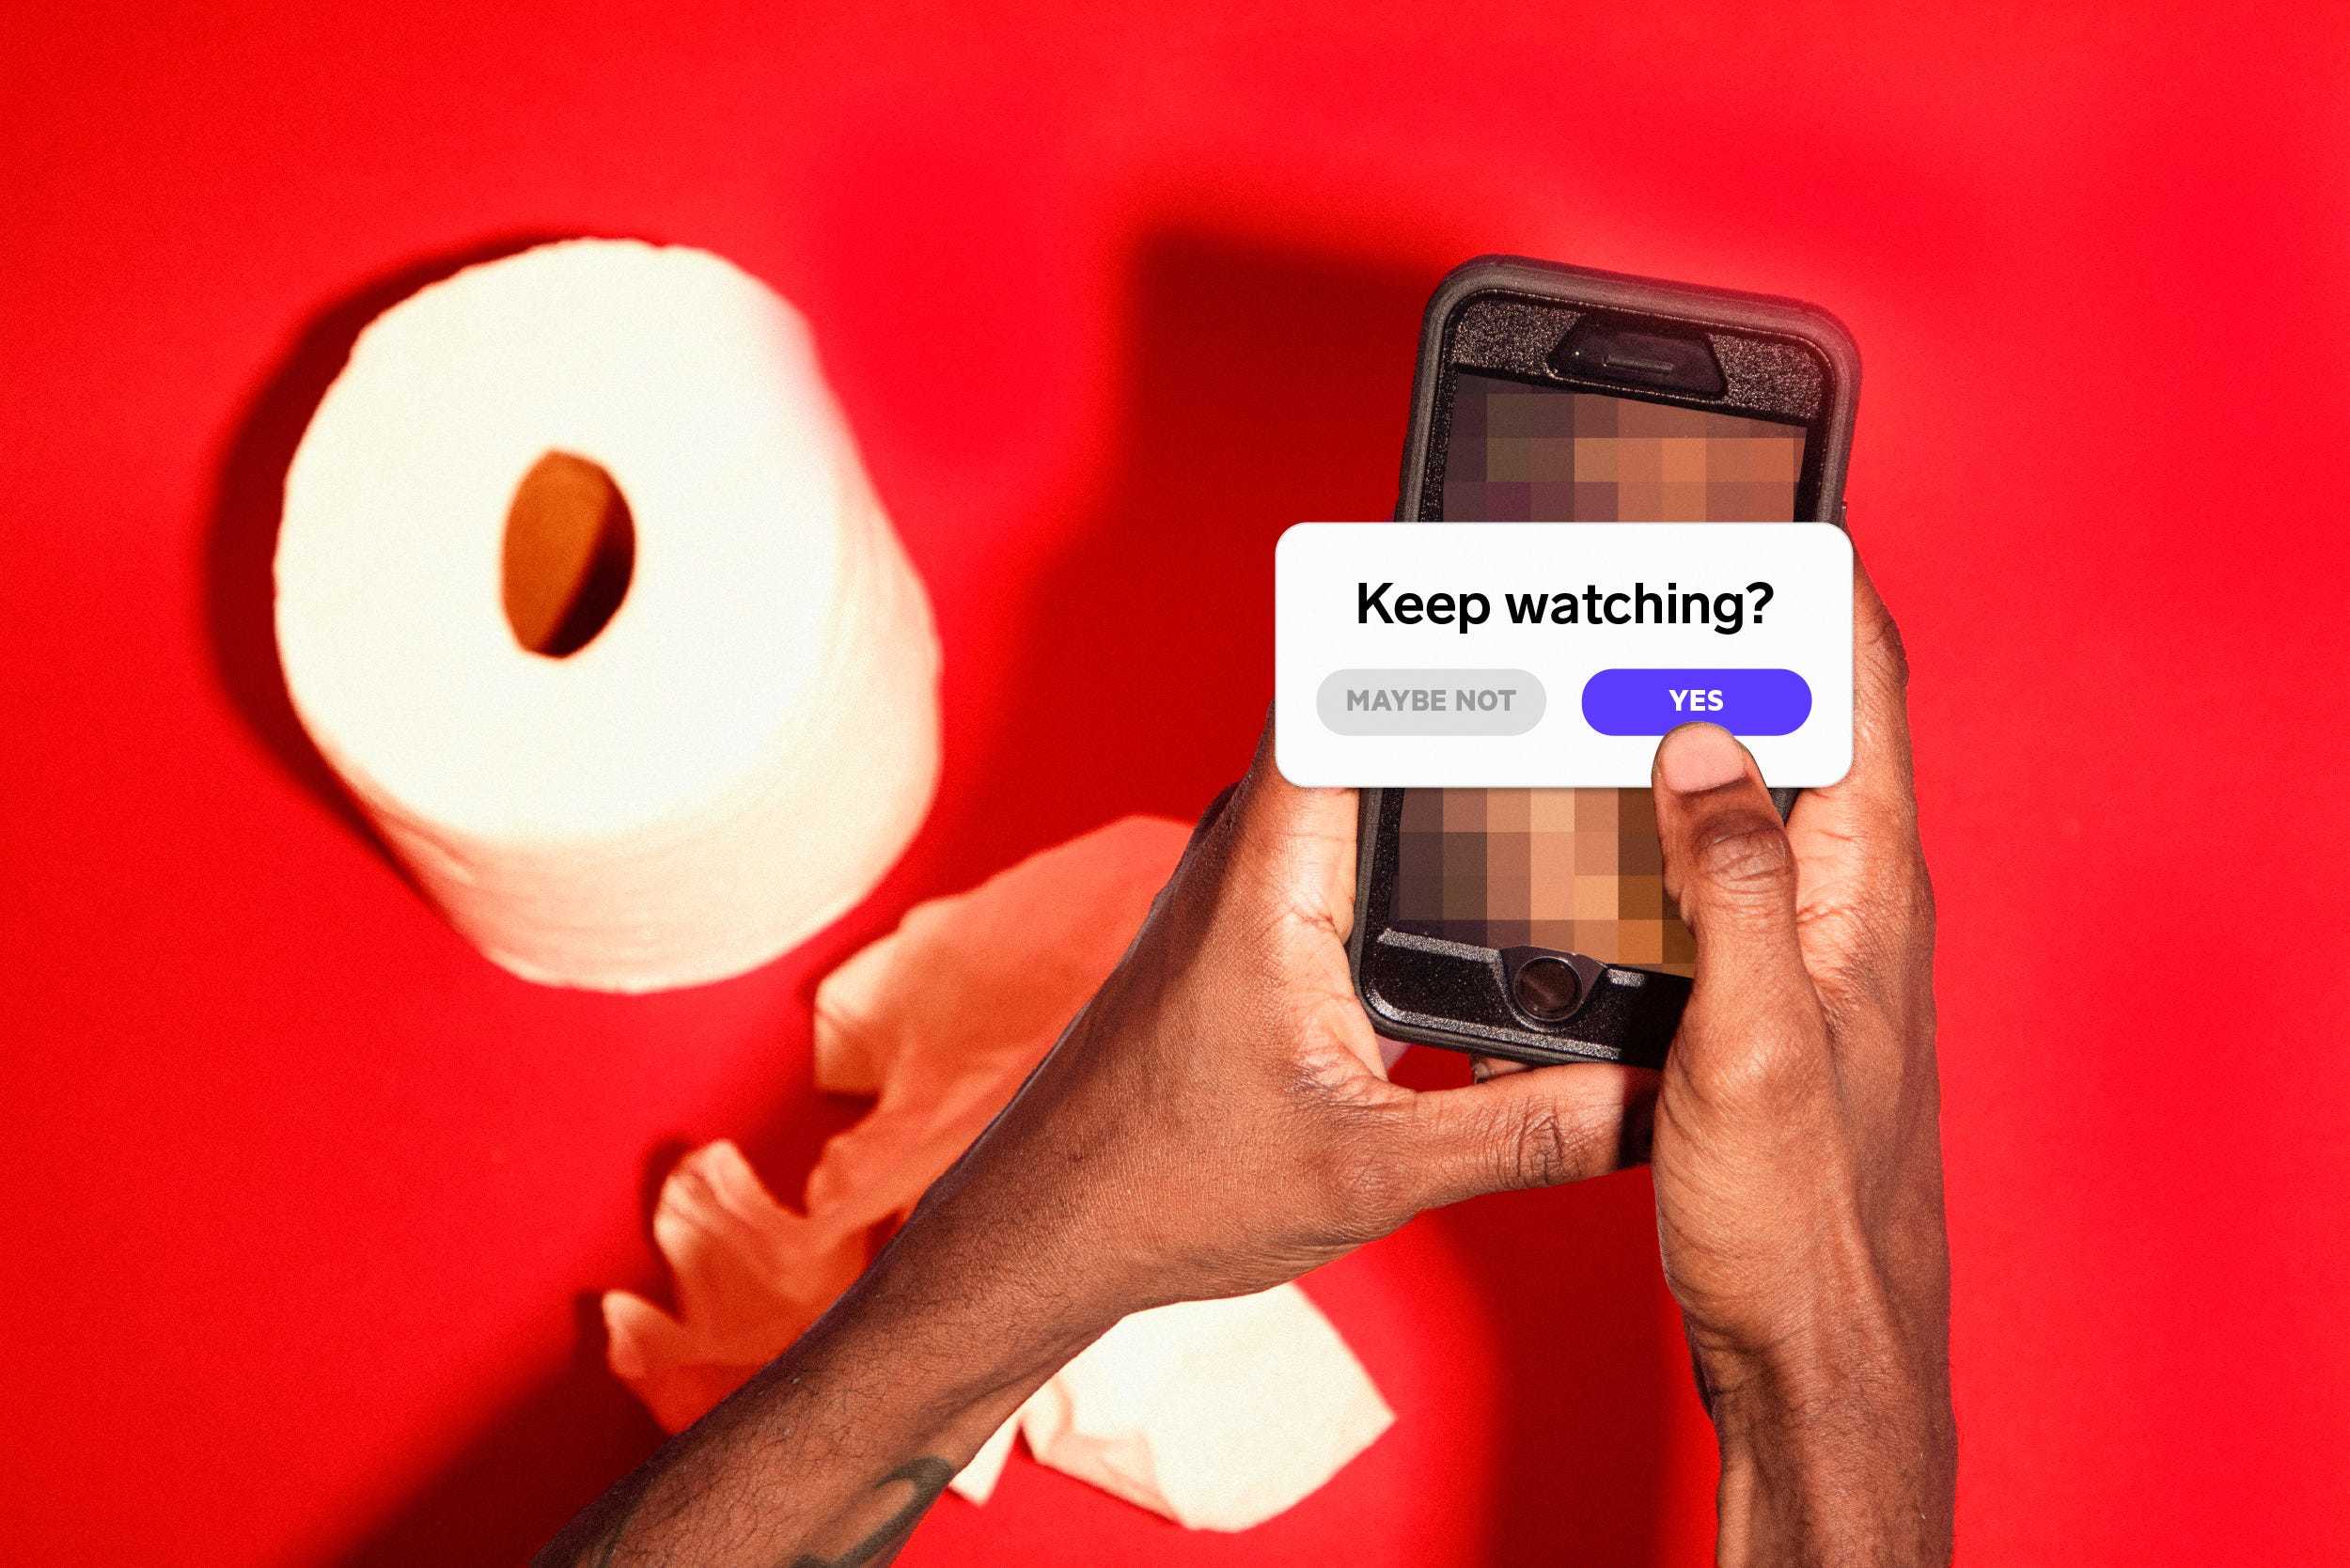 Hands holding a phone with a pixellated screen. A pop up is asking if they want to keep watching videos and their thumb is over the "yes" option. A toilet paper roll and used toilet paper is in the red background.